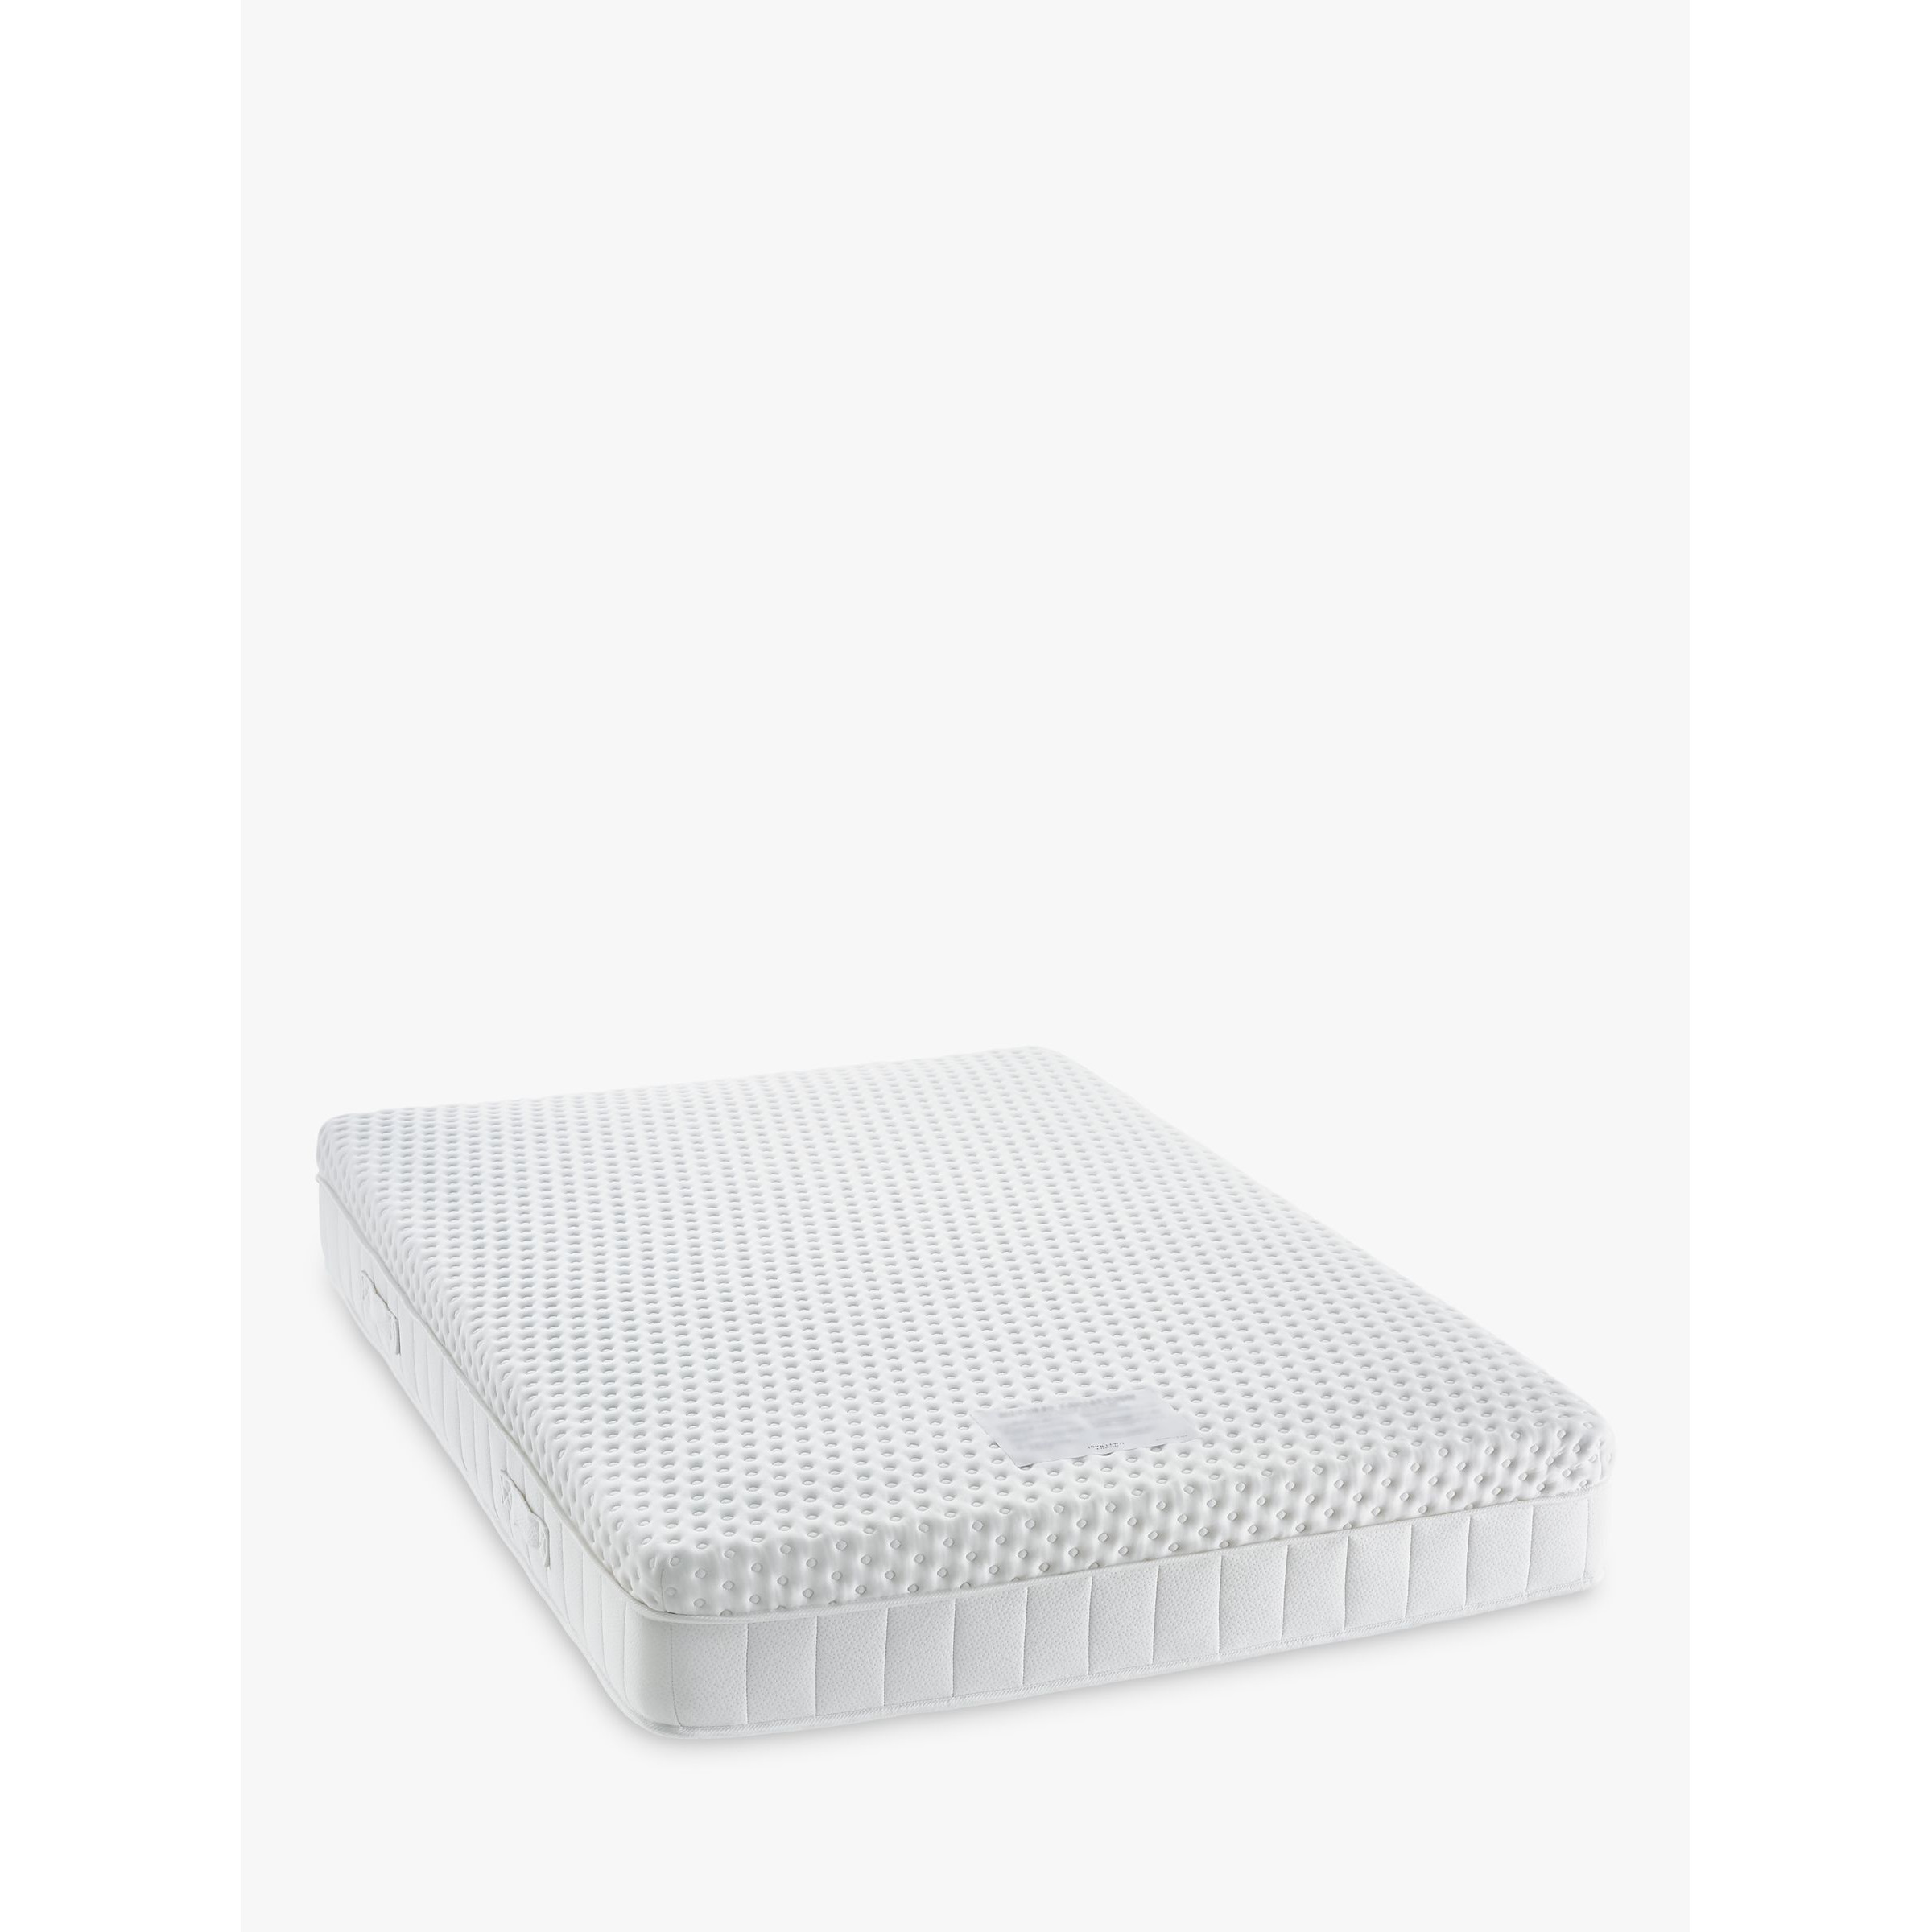 John Lewis Climate Collection 1600 Pocket Spring Mattress, Medium/Firm Tension, Small Double - image 1